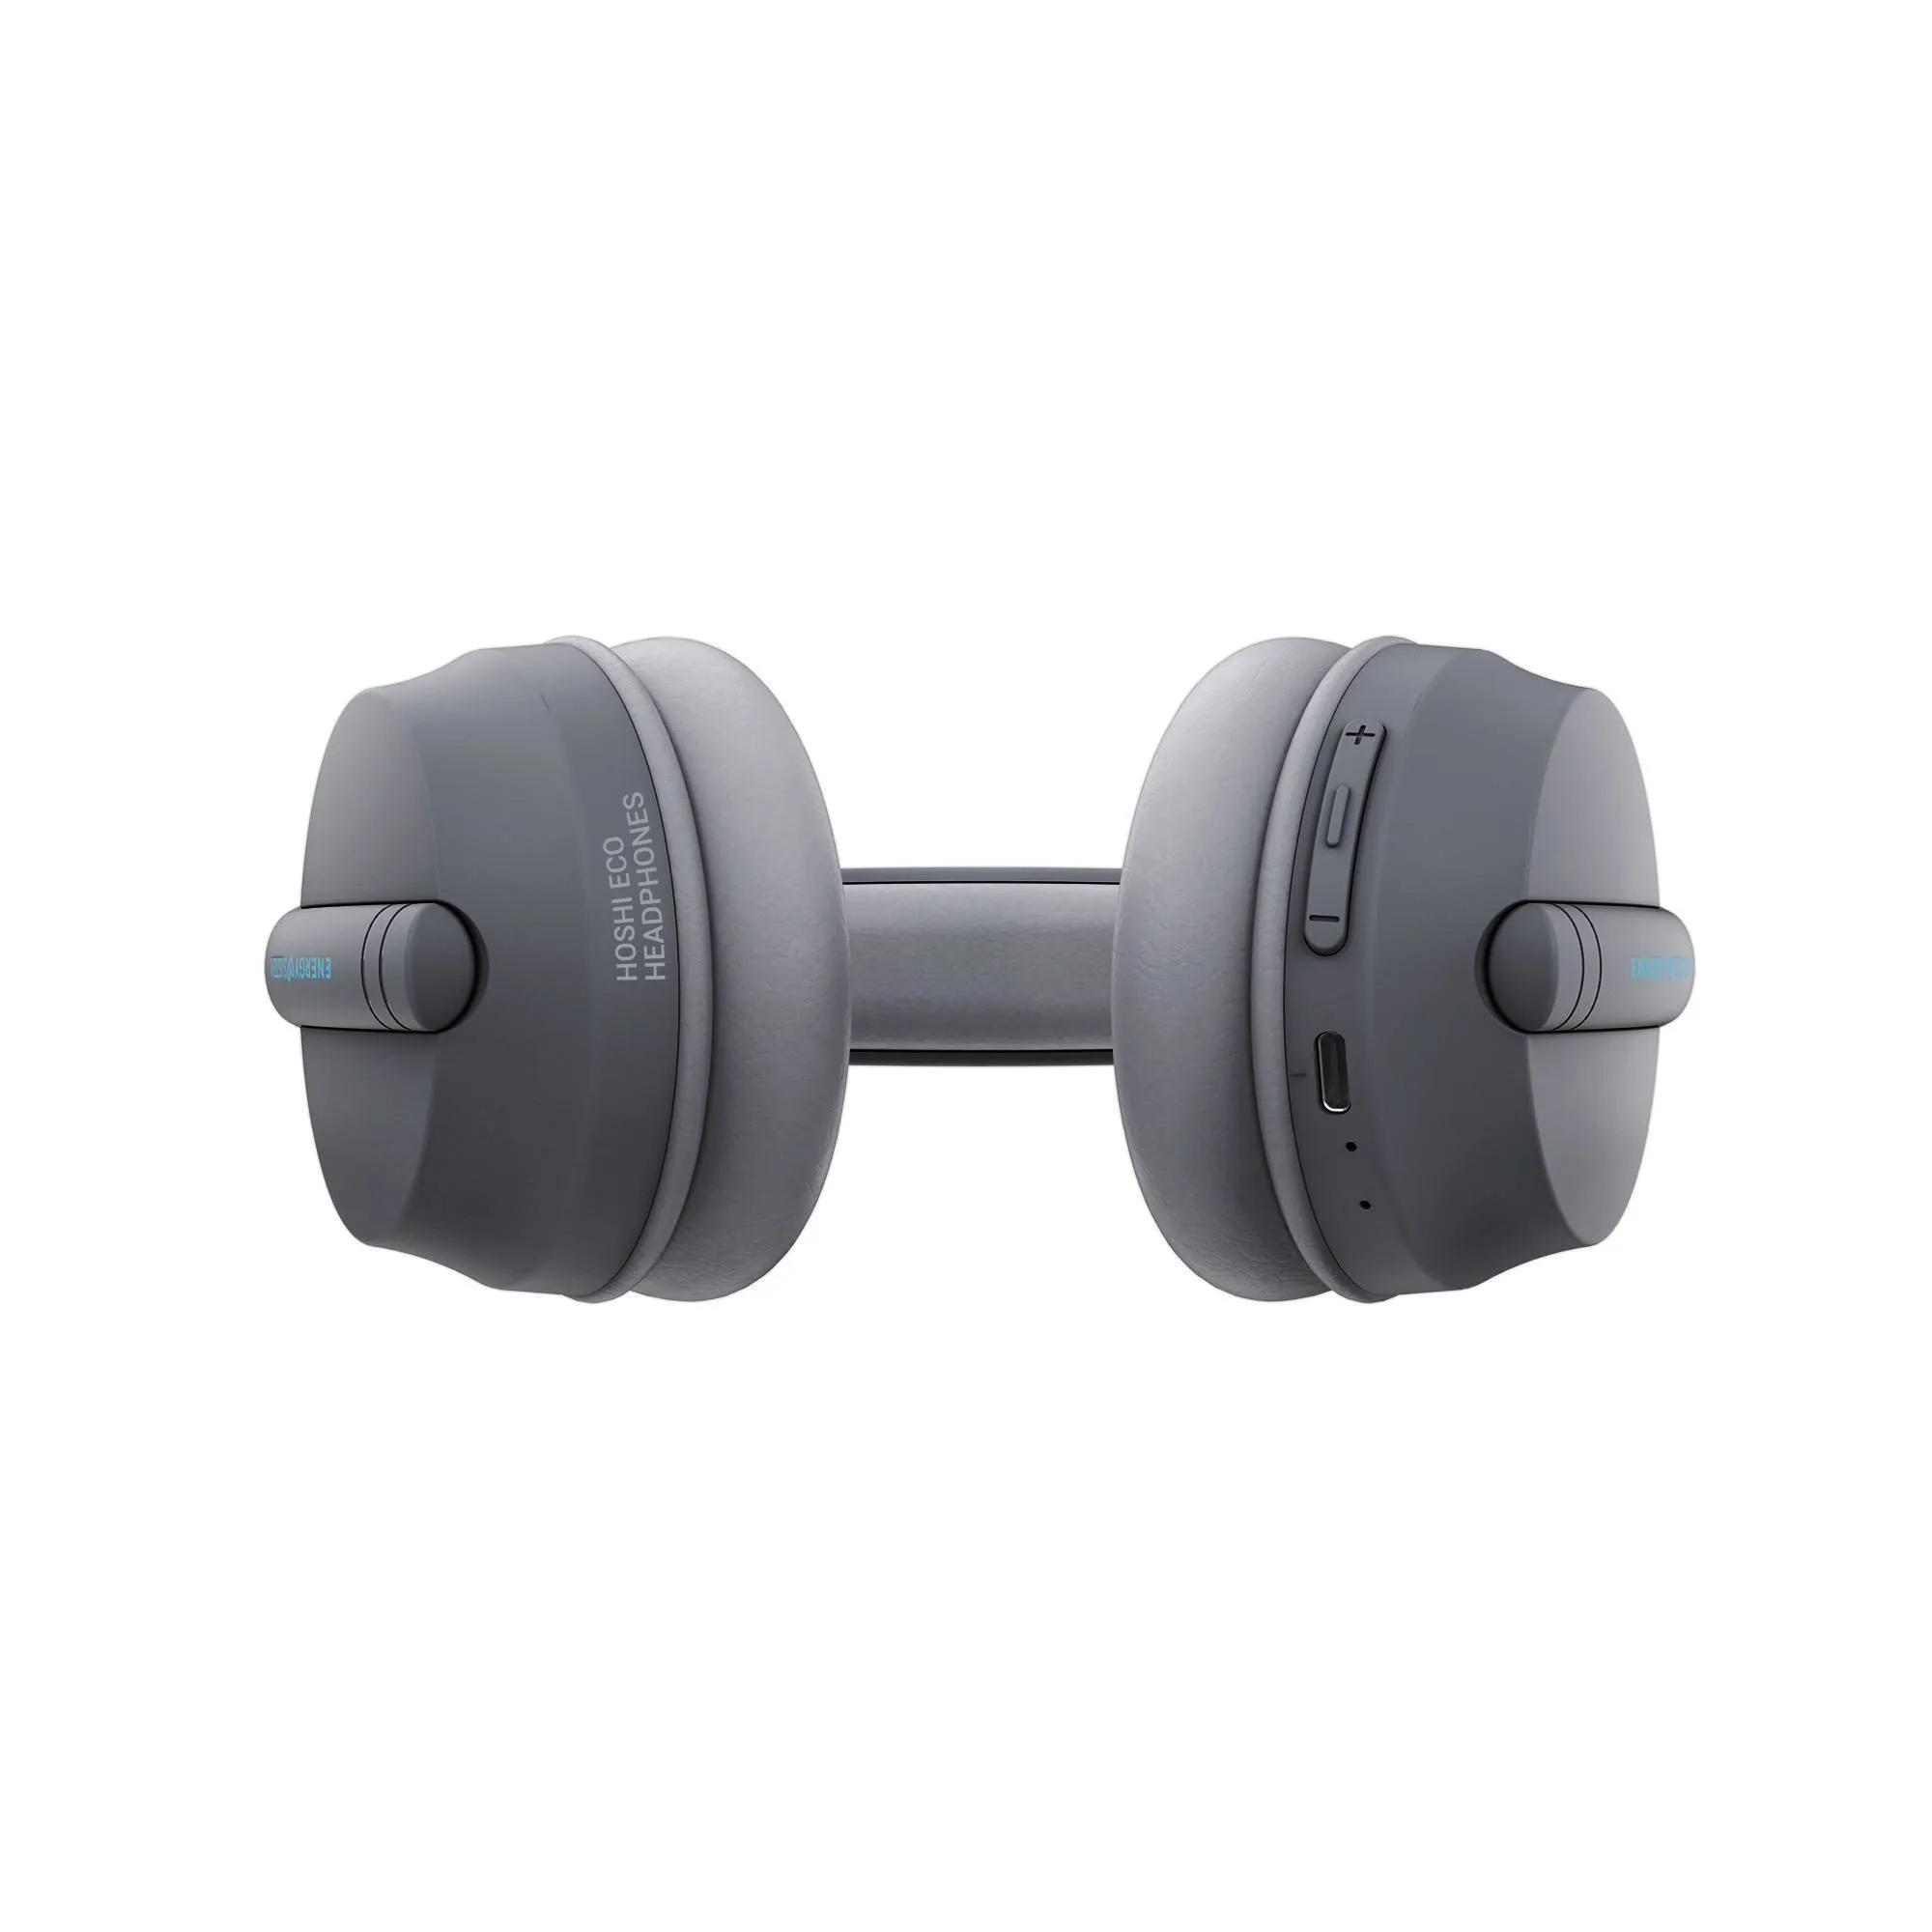 Over-ear Bluetooth headphones with stretchable, padded headband